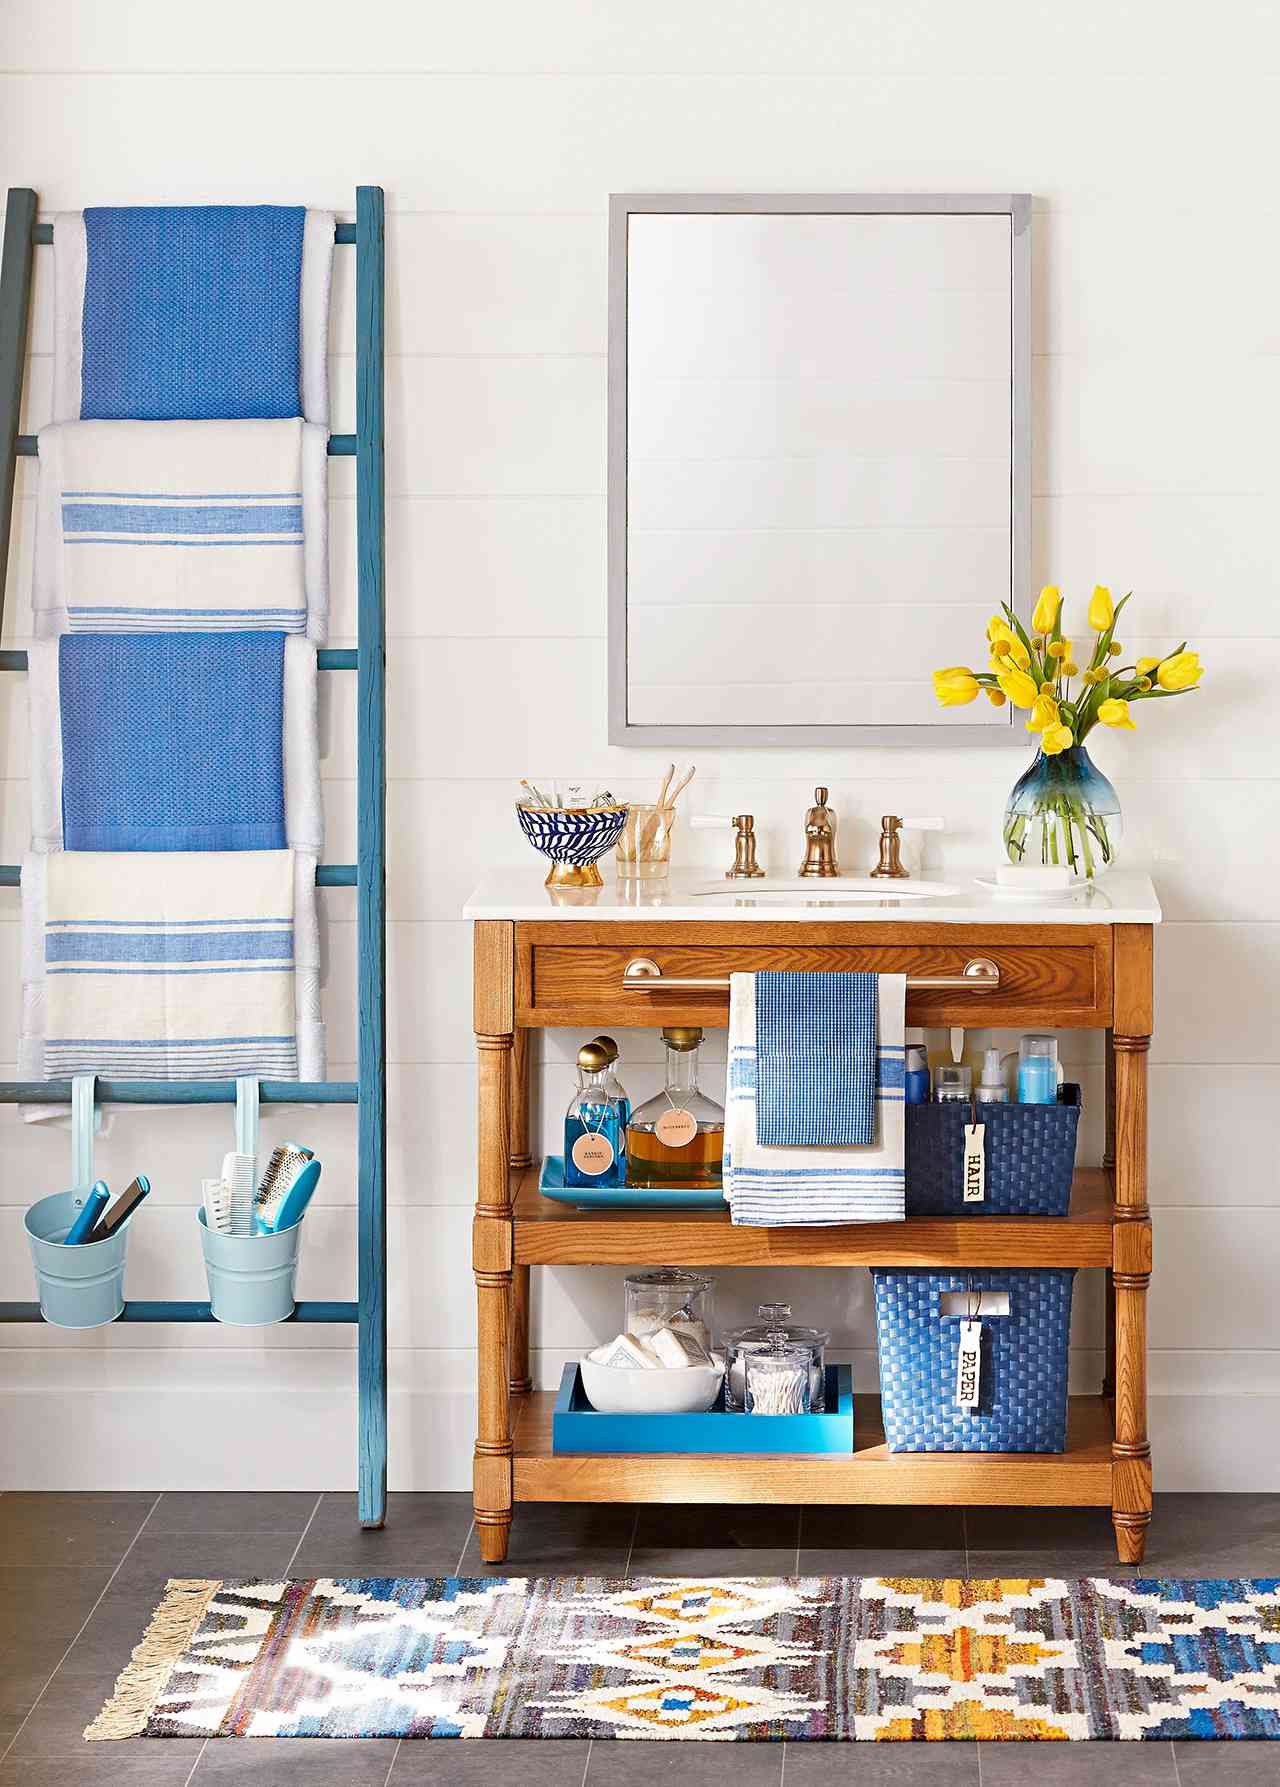 More In Your Bathroom, Bathroom Shelves Ideas For Towels